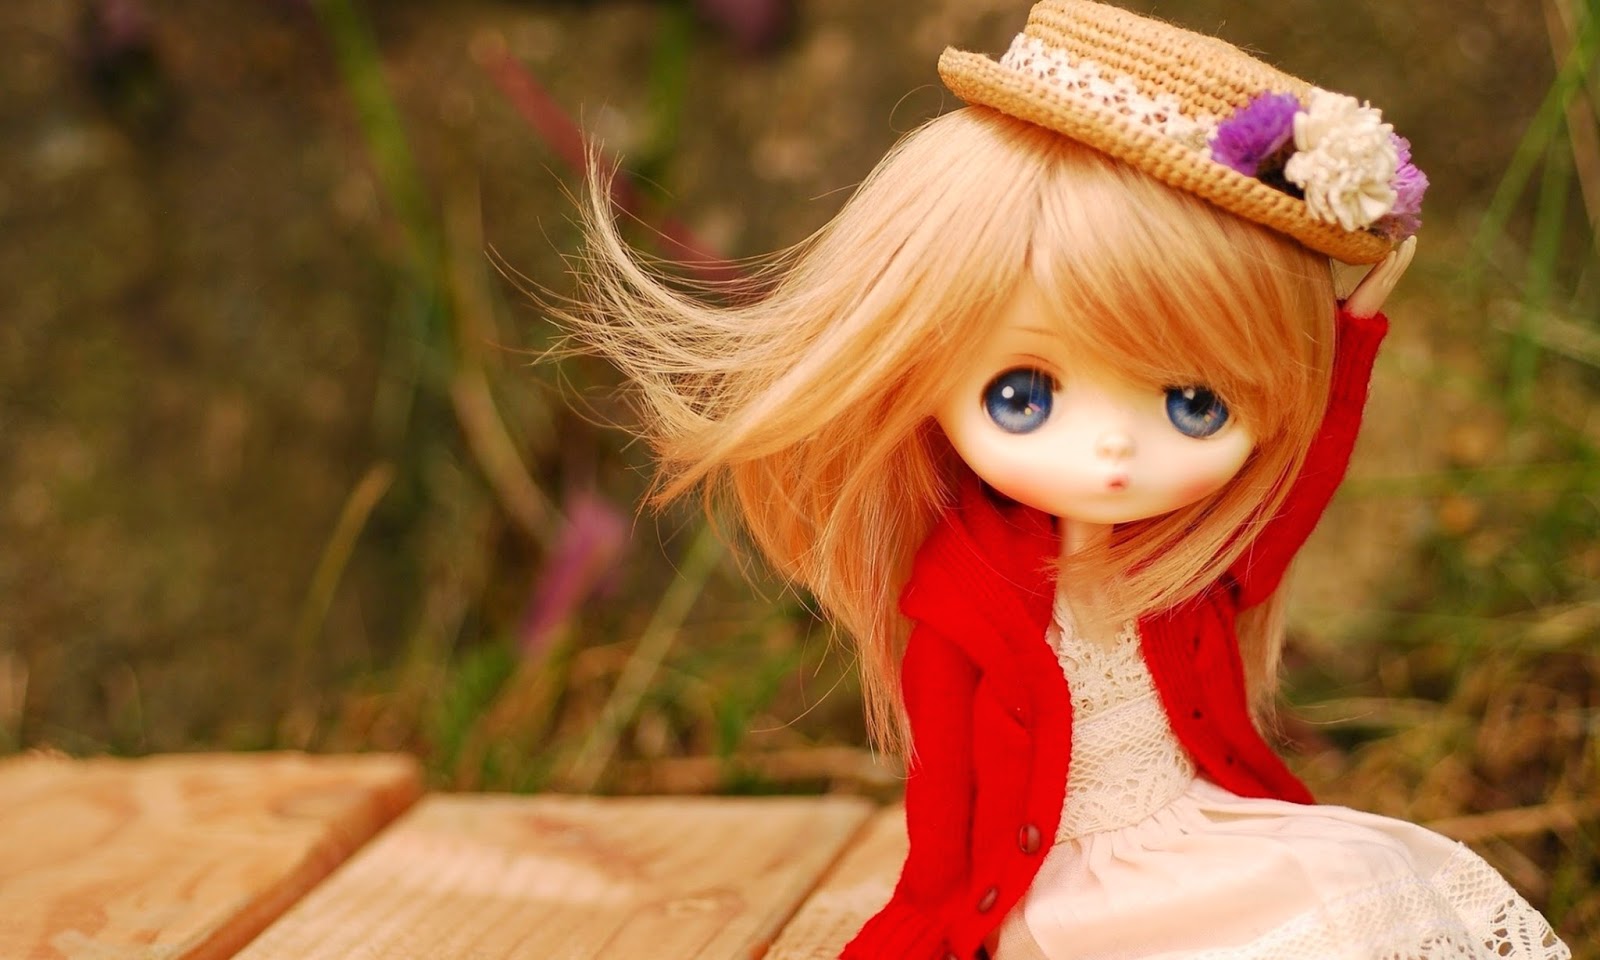 Cute Barbie Doll Wallpaper HD Pictures | One HD Wallpaper ...